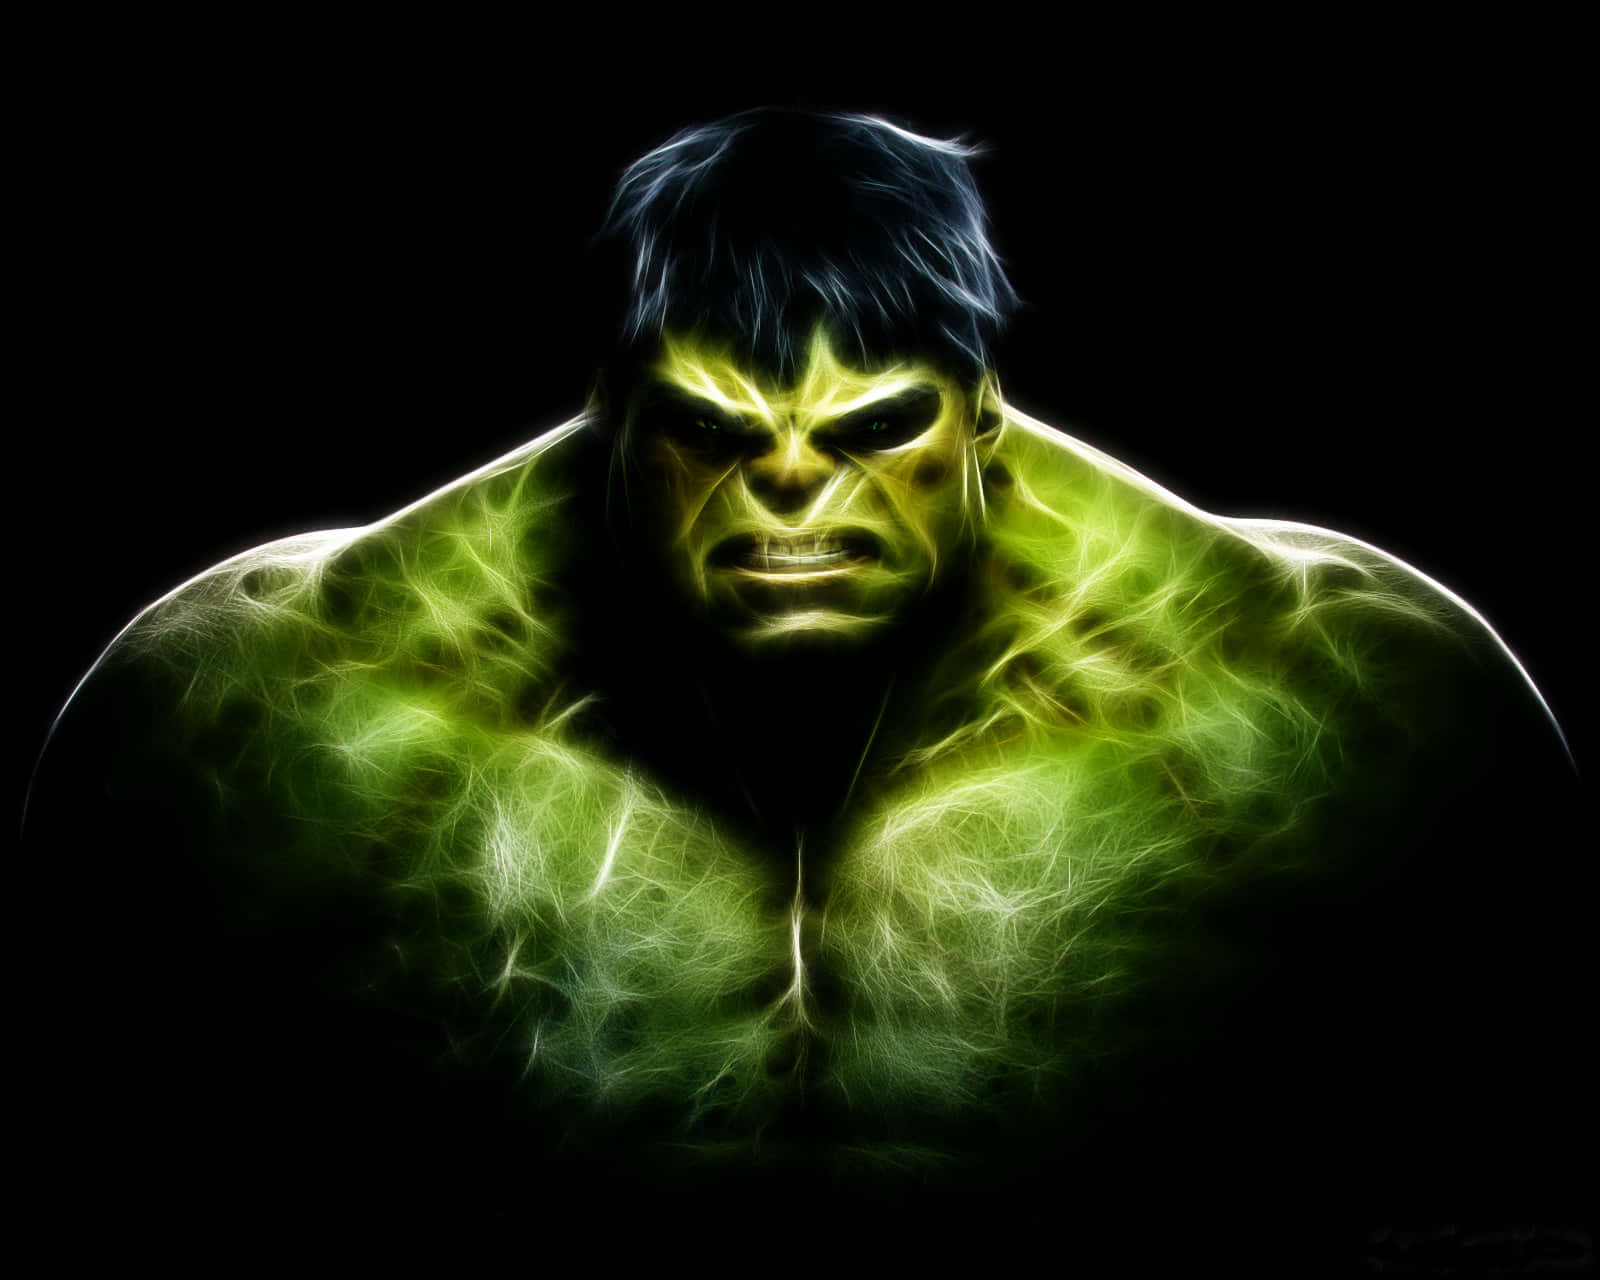 Hulk stands in front of a gold and blue background.